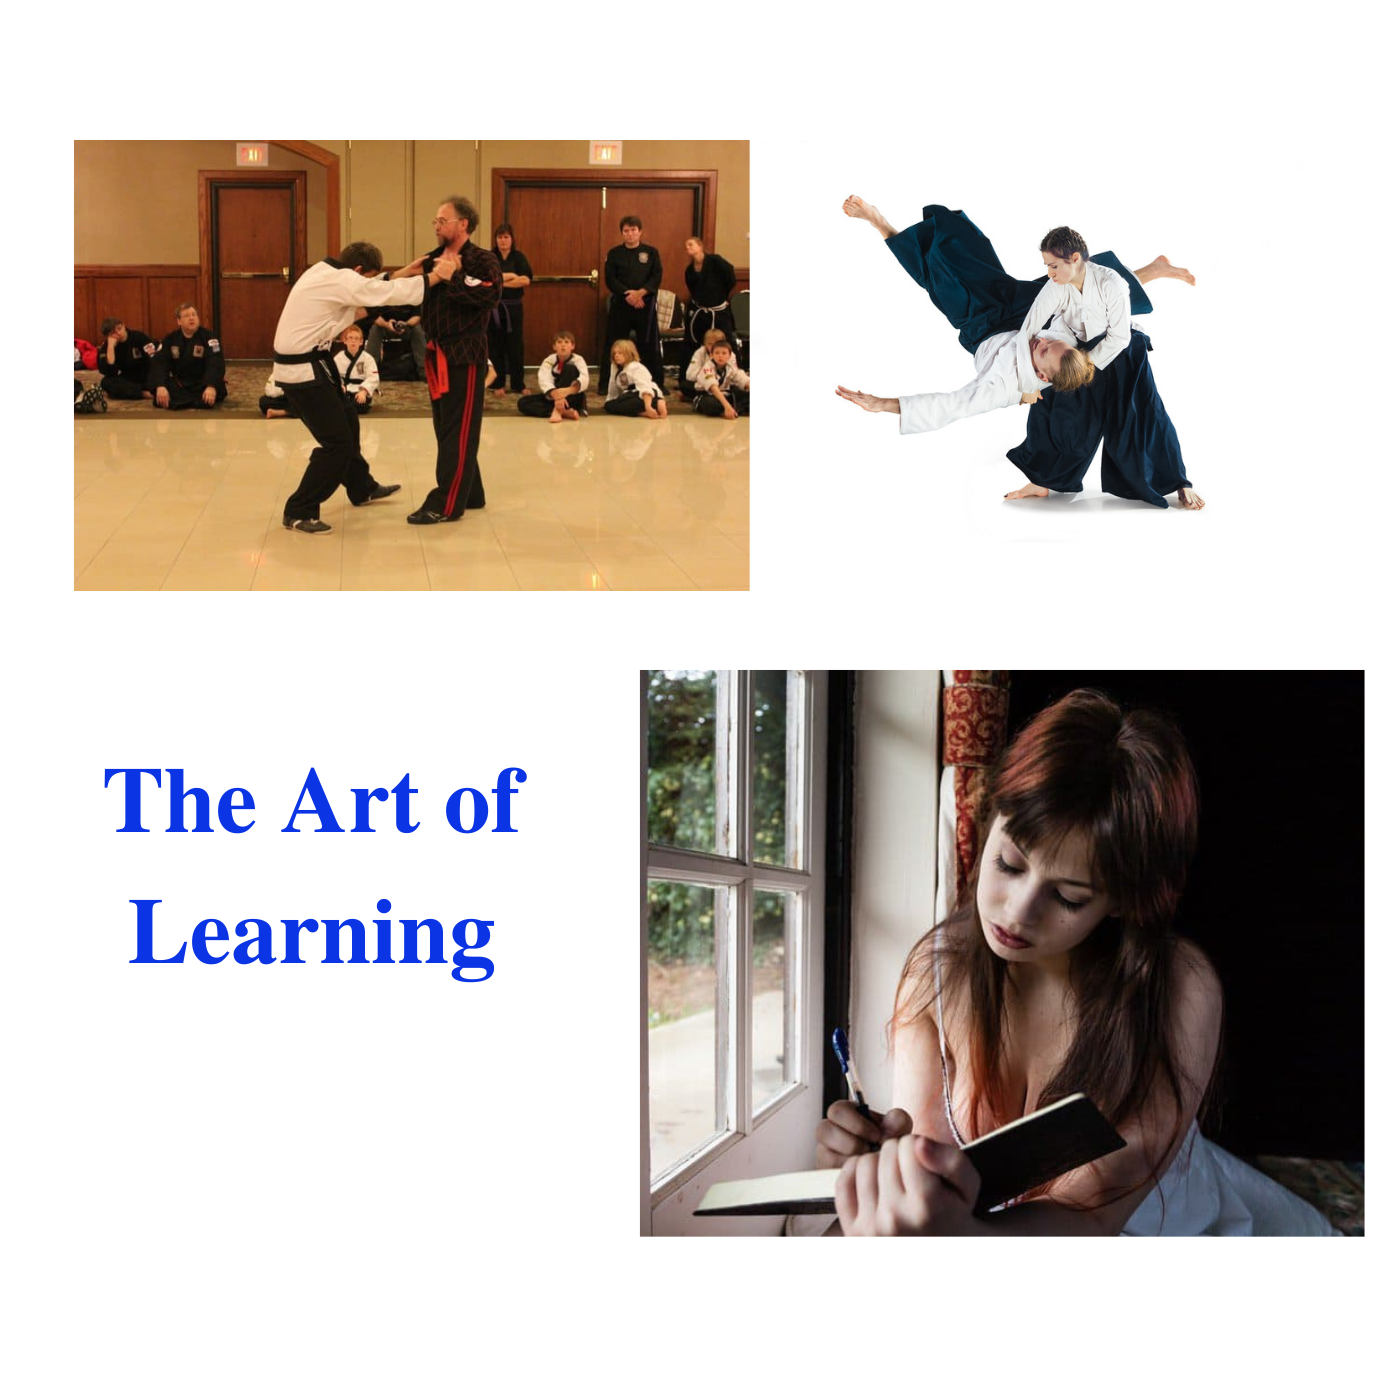 * The Art of Learning